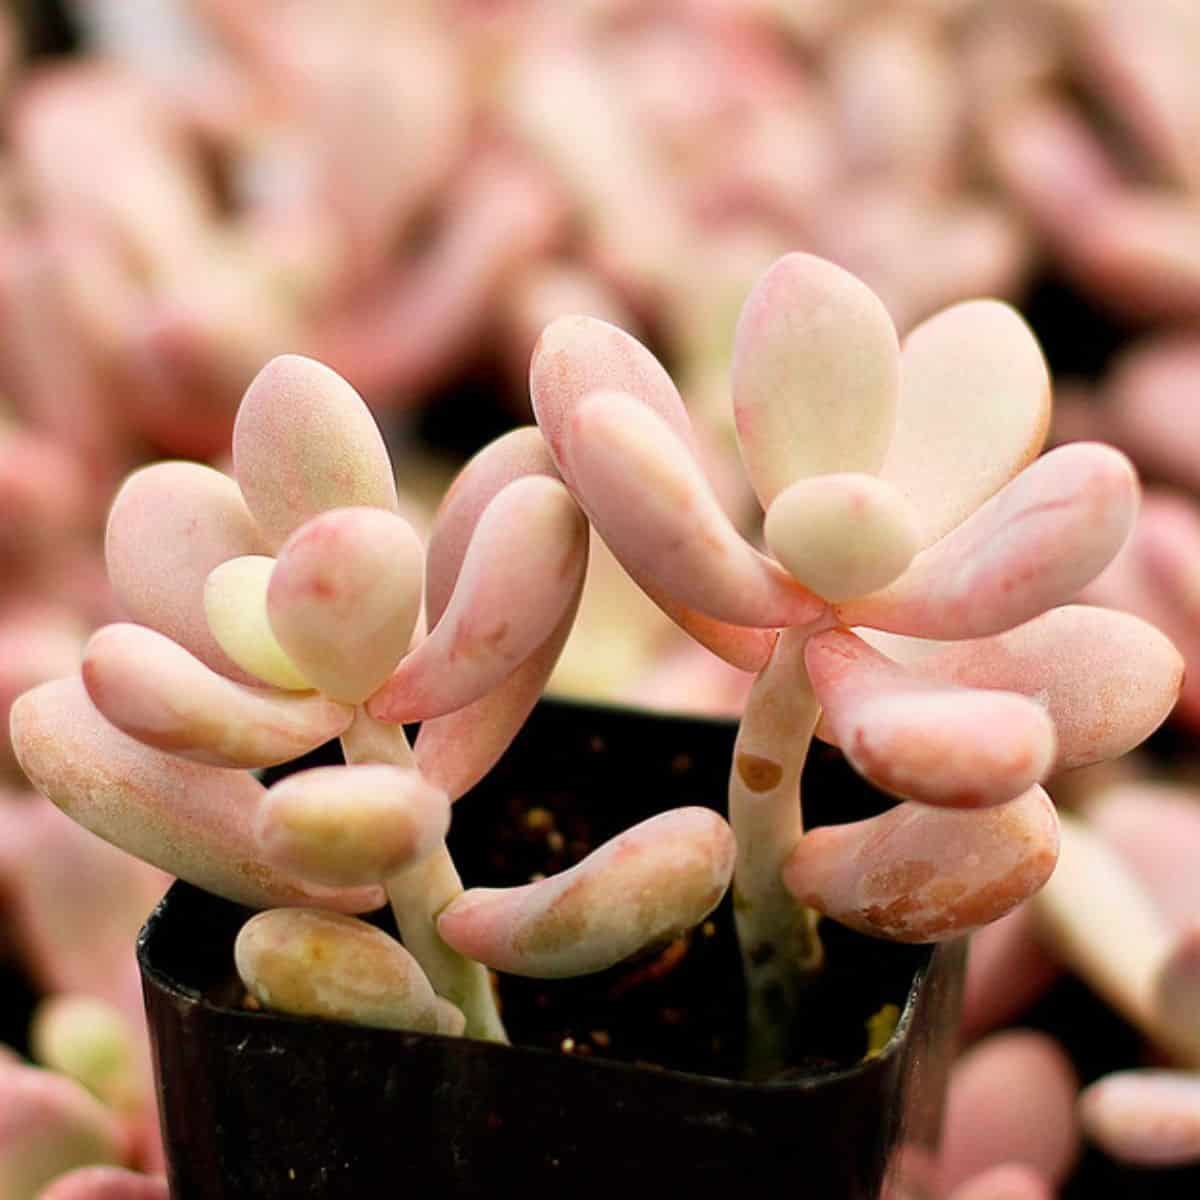 Pachyphytum oviferum – Moonstones growing in a pot.